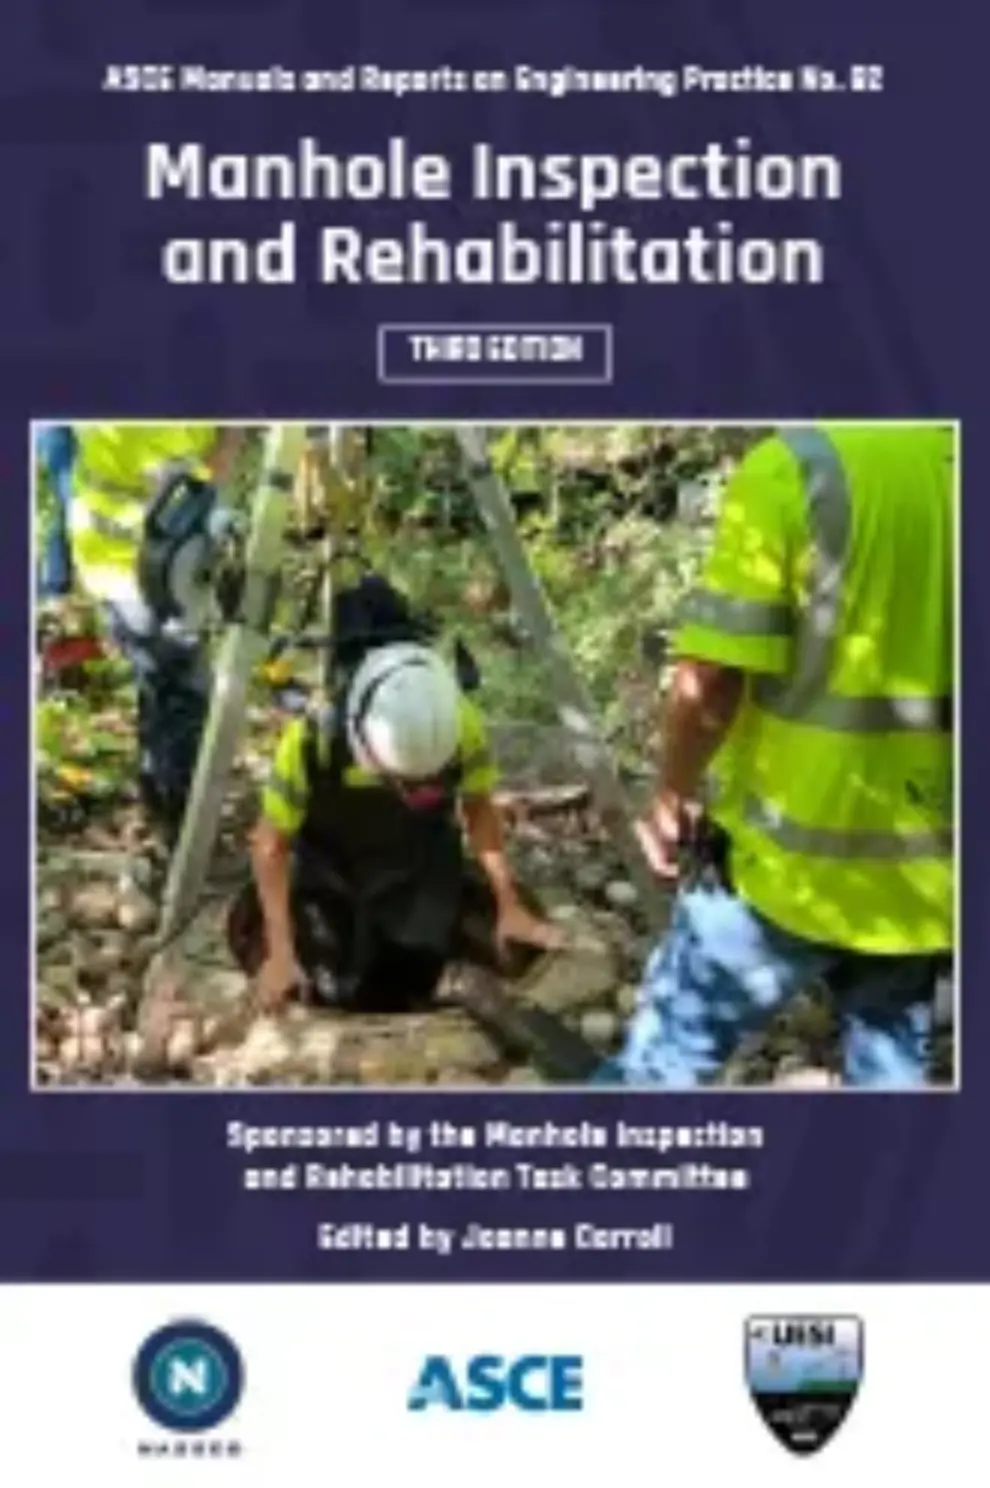 <a><strong>Updated ASCE Manual of Practice 92 Provides Latest Guidance on Inspection and Rehabilitation of Manholes</strong></a>